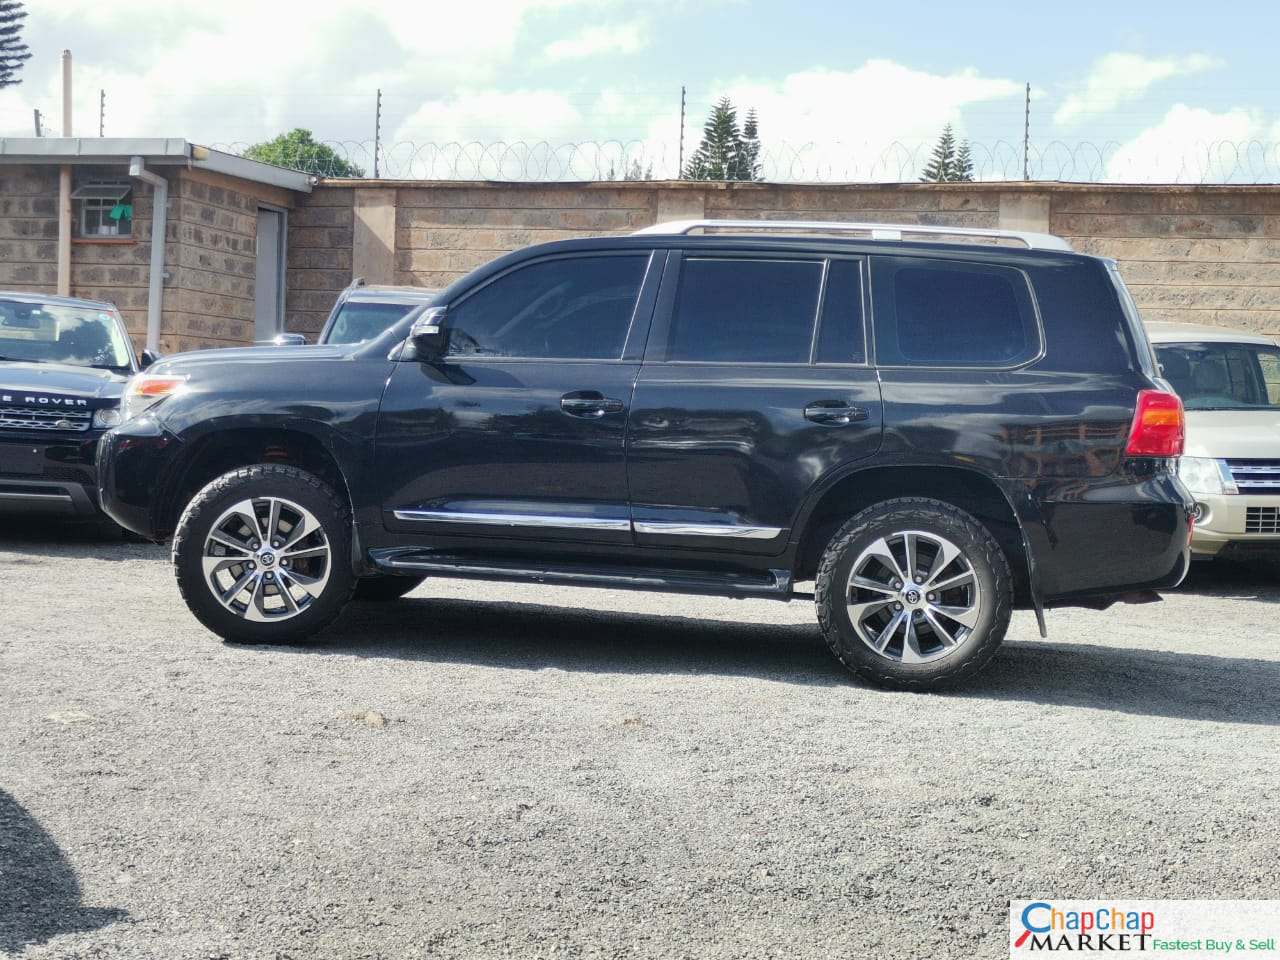 Cars Cars For Sale/Vehicles-Toyota Land cruiser V8 DIESEL 200 series TRADE IN OK EXCLUSIVE for Sale in Kenya EXCLUSIVE